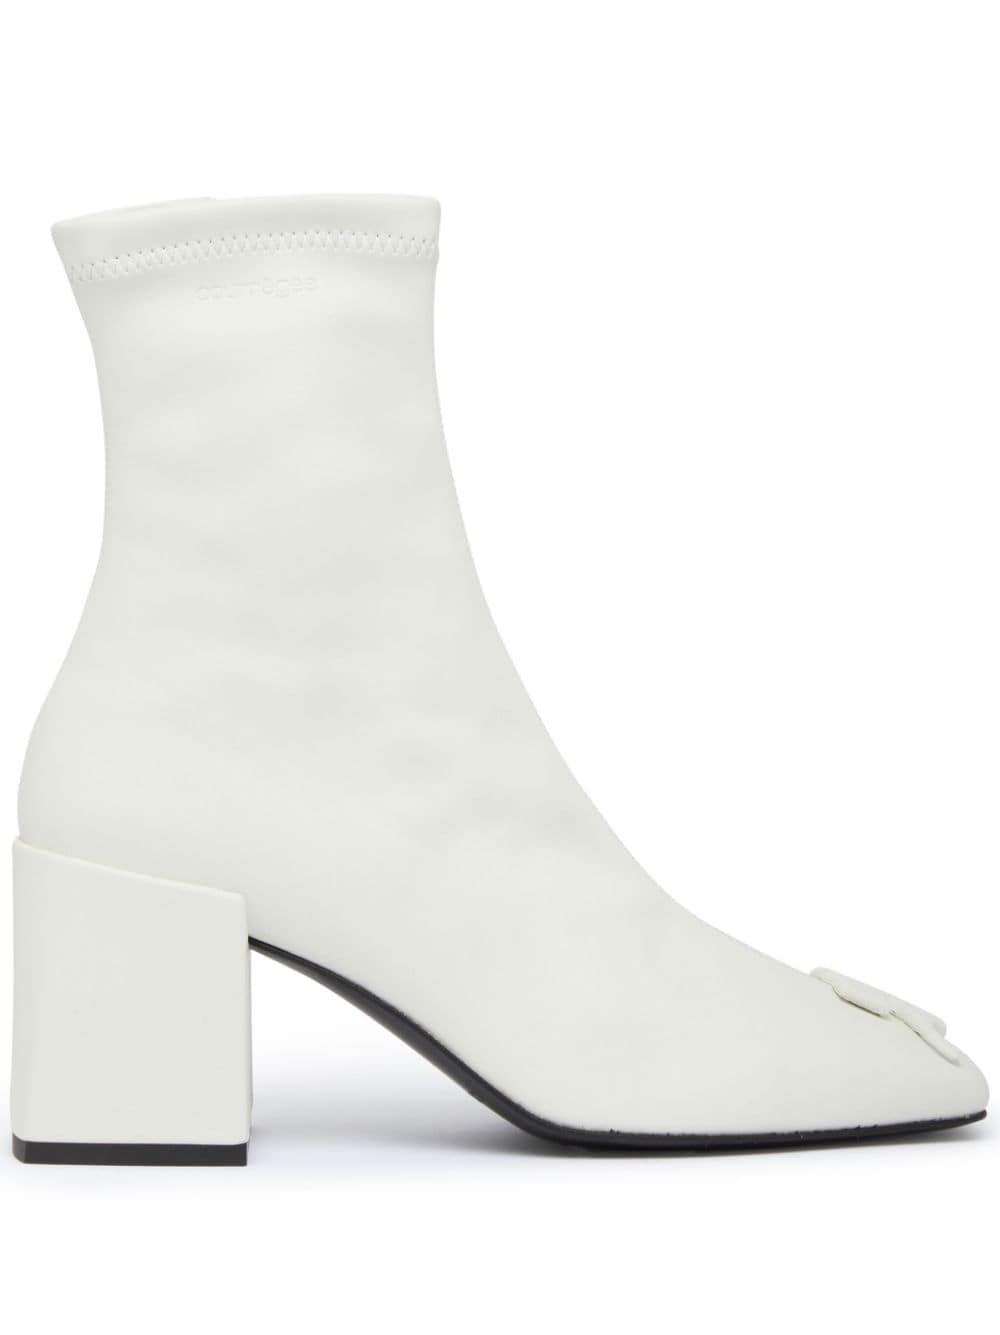 Courrèges Reedition AC ankle boots - White